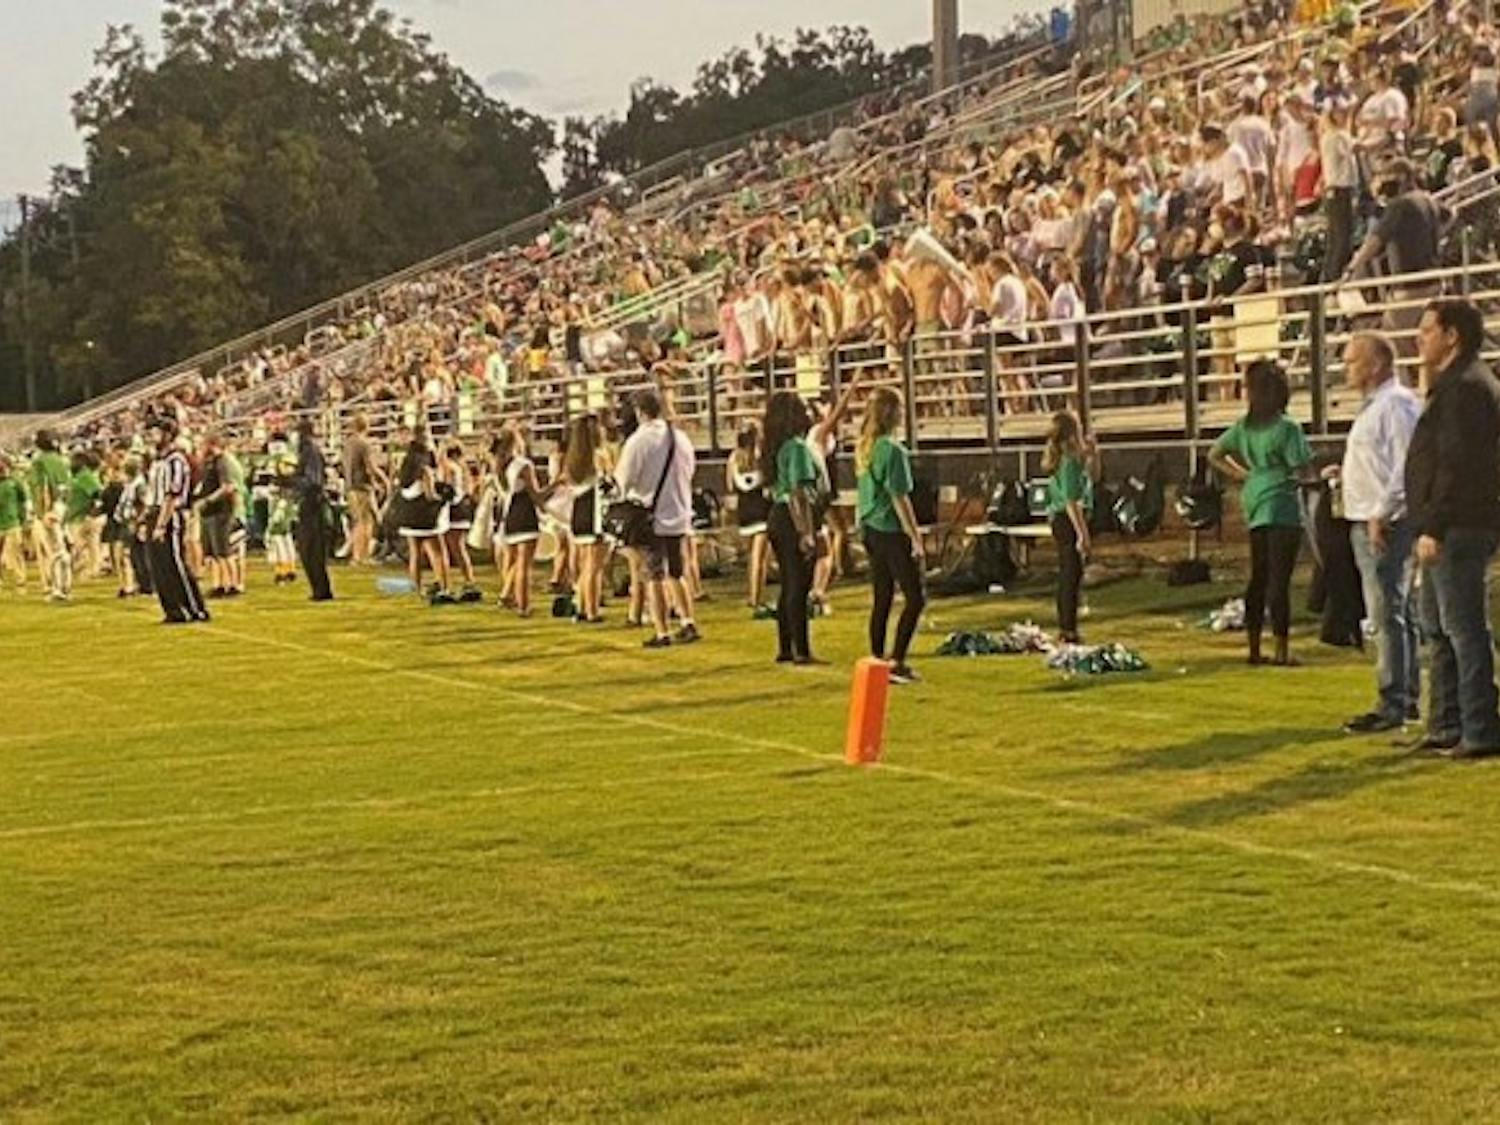 Florida Gov. Ron DeSantis made a trip to Live Oak, Florida, to watch the Suwannee Bulldogs take on the Santa Fe Raiders Friday night. He left in the second quarter.